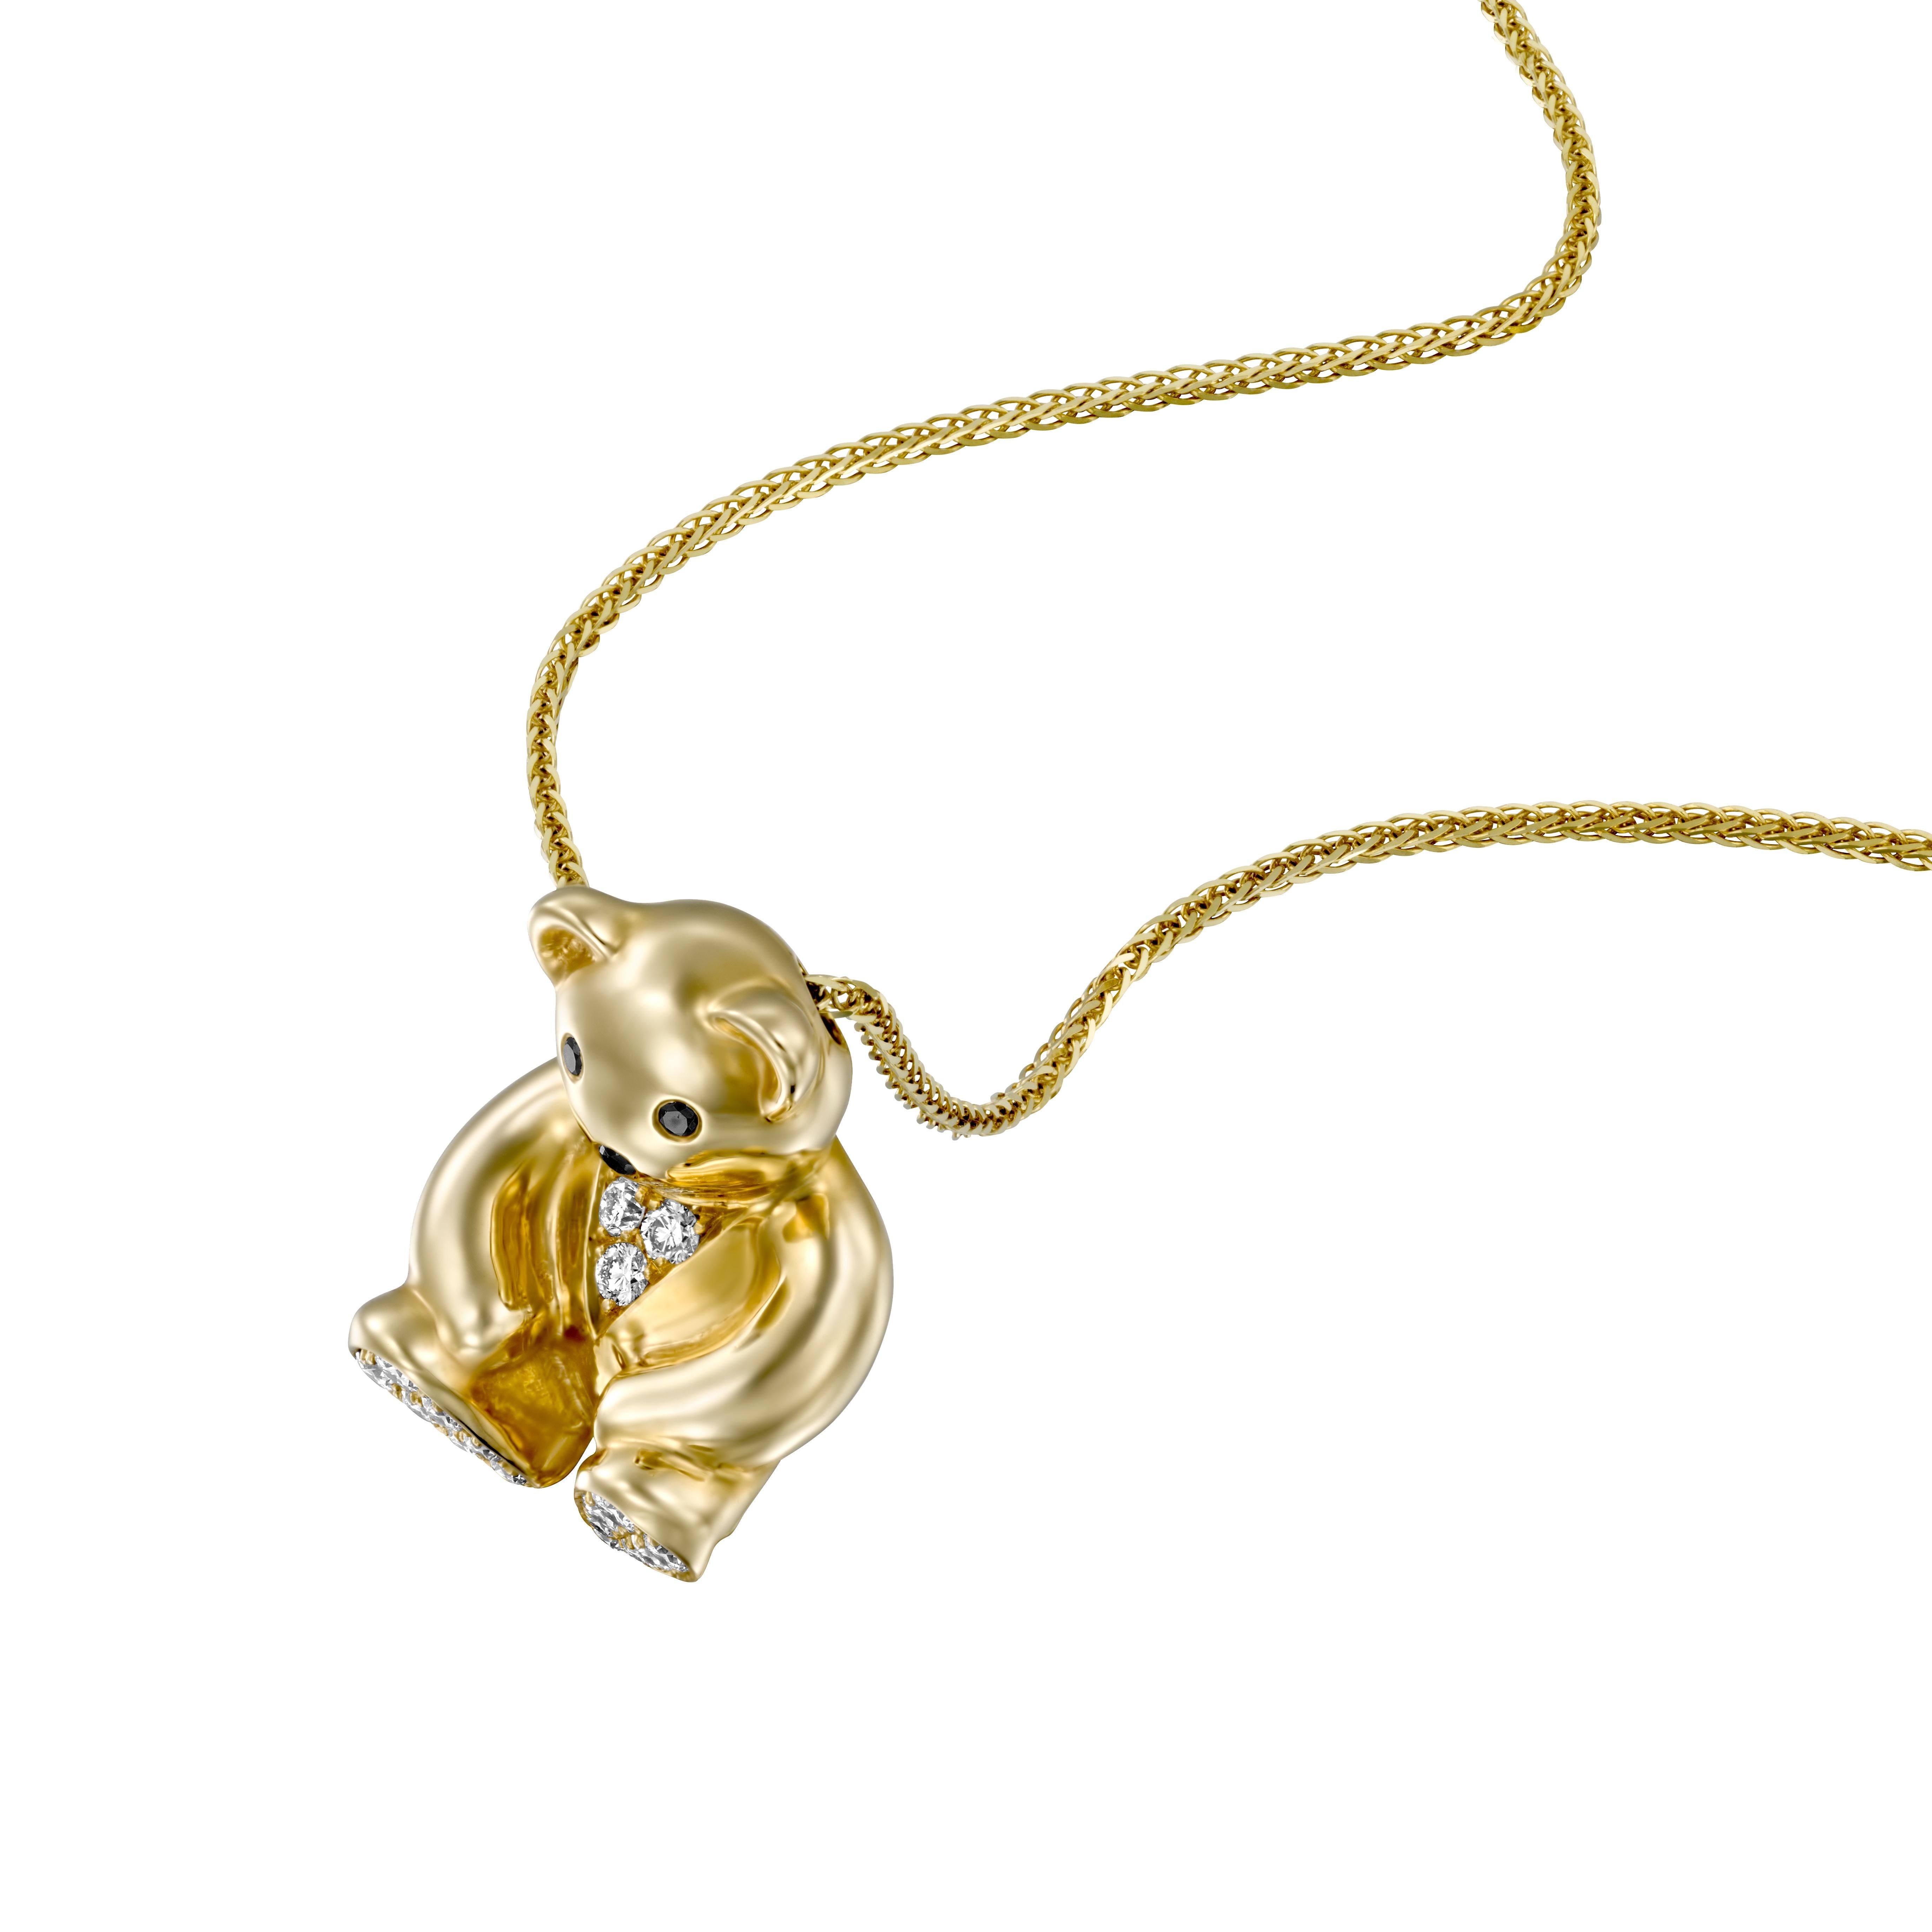 Introducing the adorable Geraldo Yellow Gold Teddy Bear Pendant, a charming piece that captures the essence of joy and playfulness. This delightful pendant is crafted with exceptional artistry, featuring round diamonds and black diamonds set in 14k